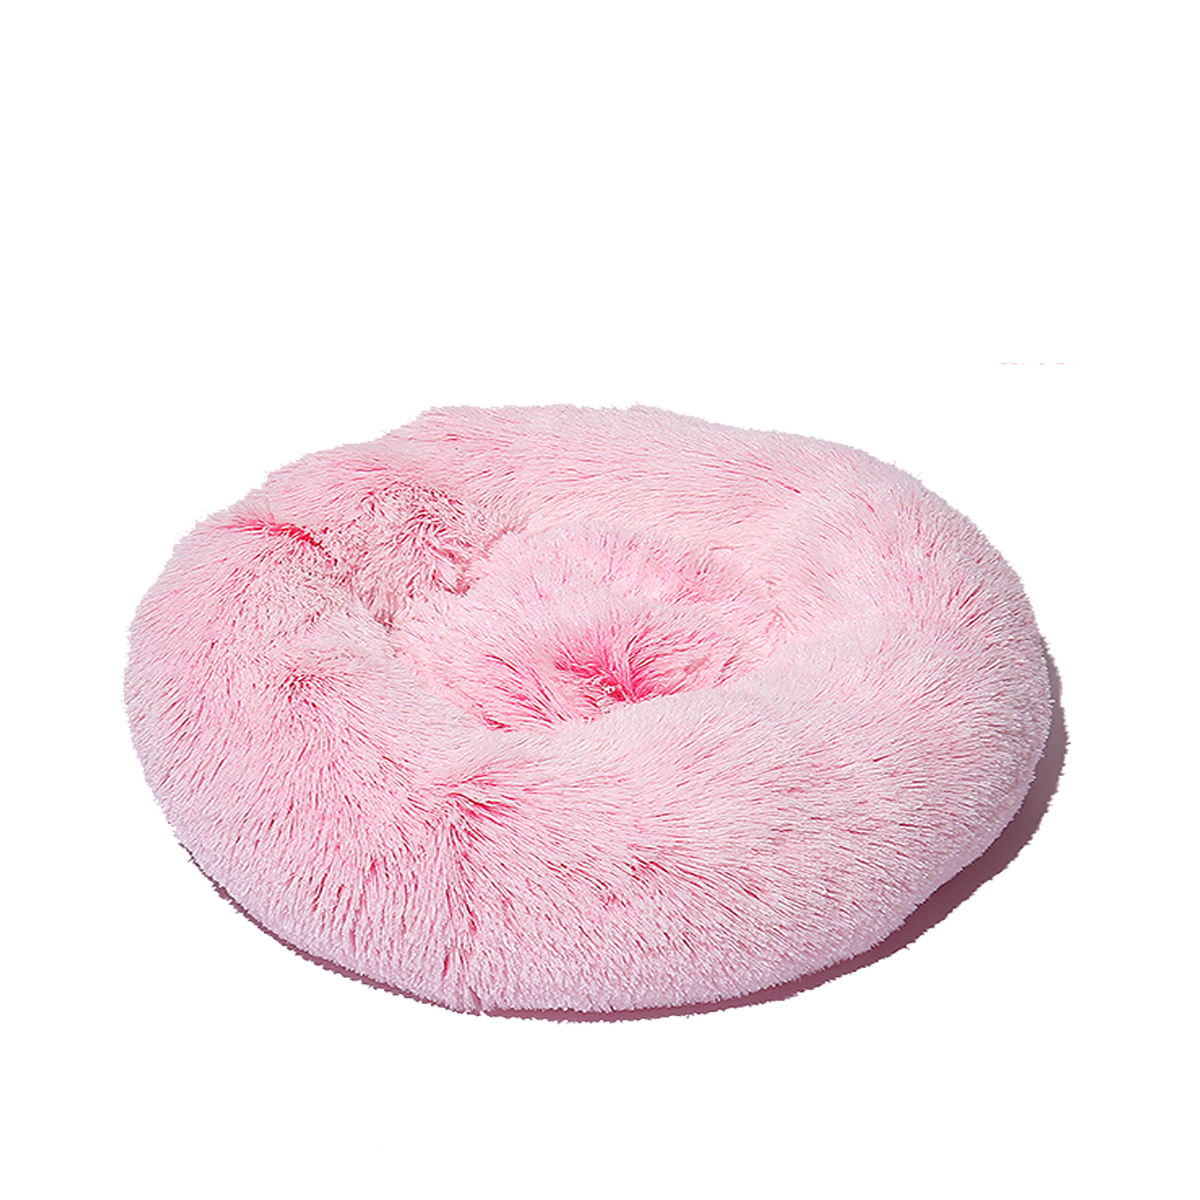 70cm-Plush-Fluffy-Soft-Pet-Bed-for-Cats--Dogs-Calming-Bed-Pad-Soft-Mat-Home-1808936-7